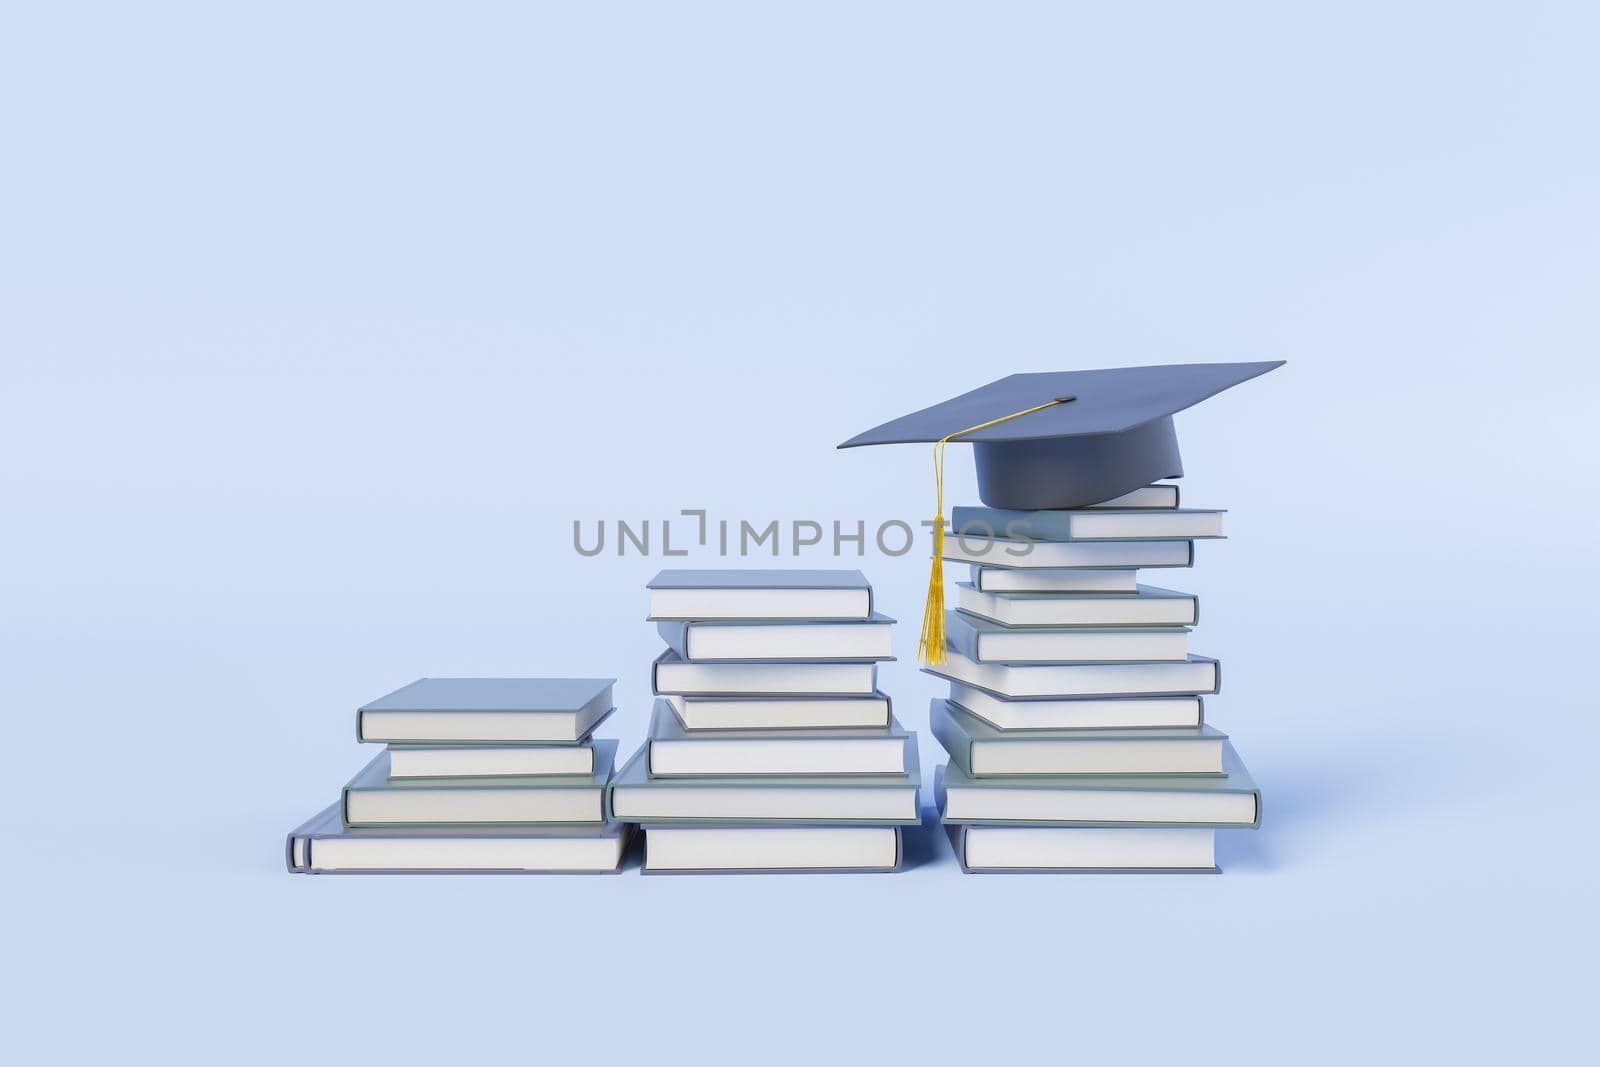 3d illustration representing concept of education with stacks of books showing learning and development process leading to graduation on light blue background